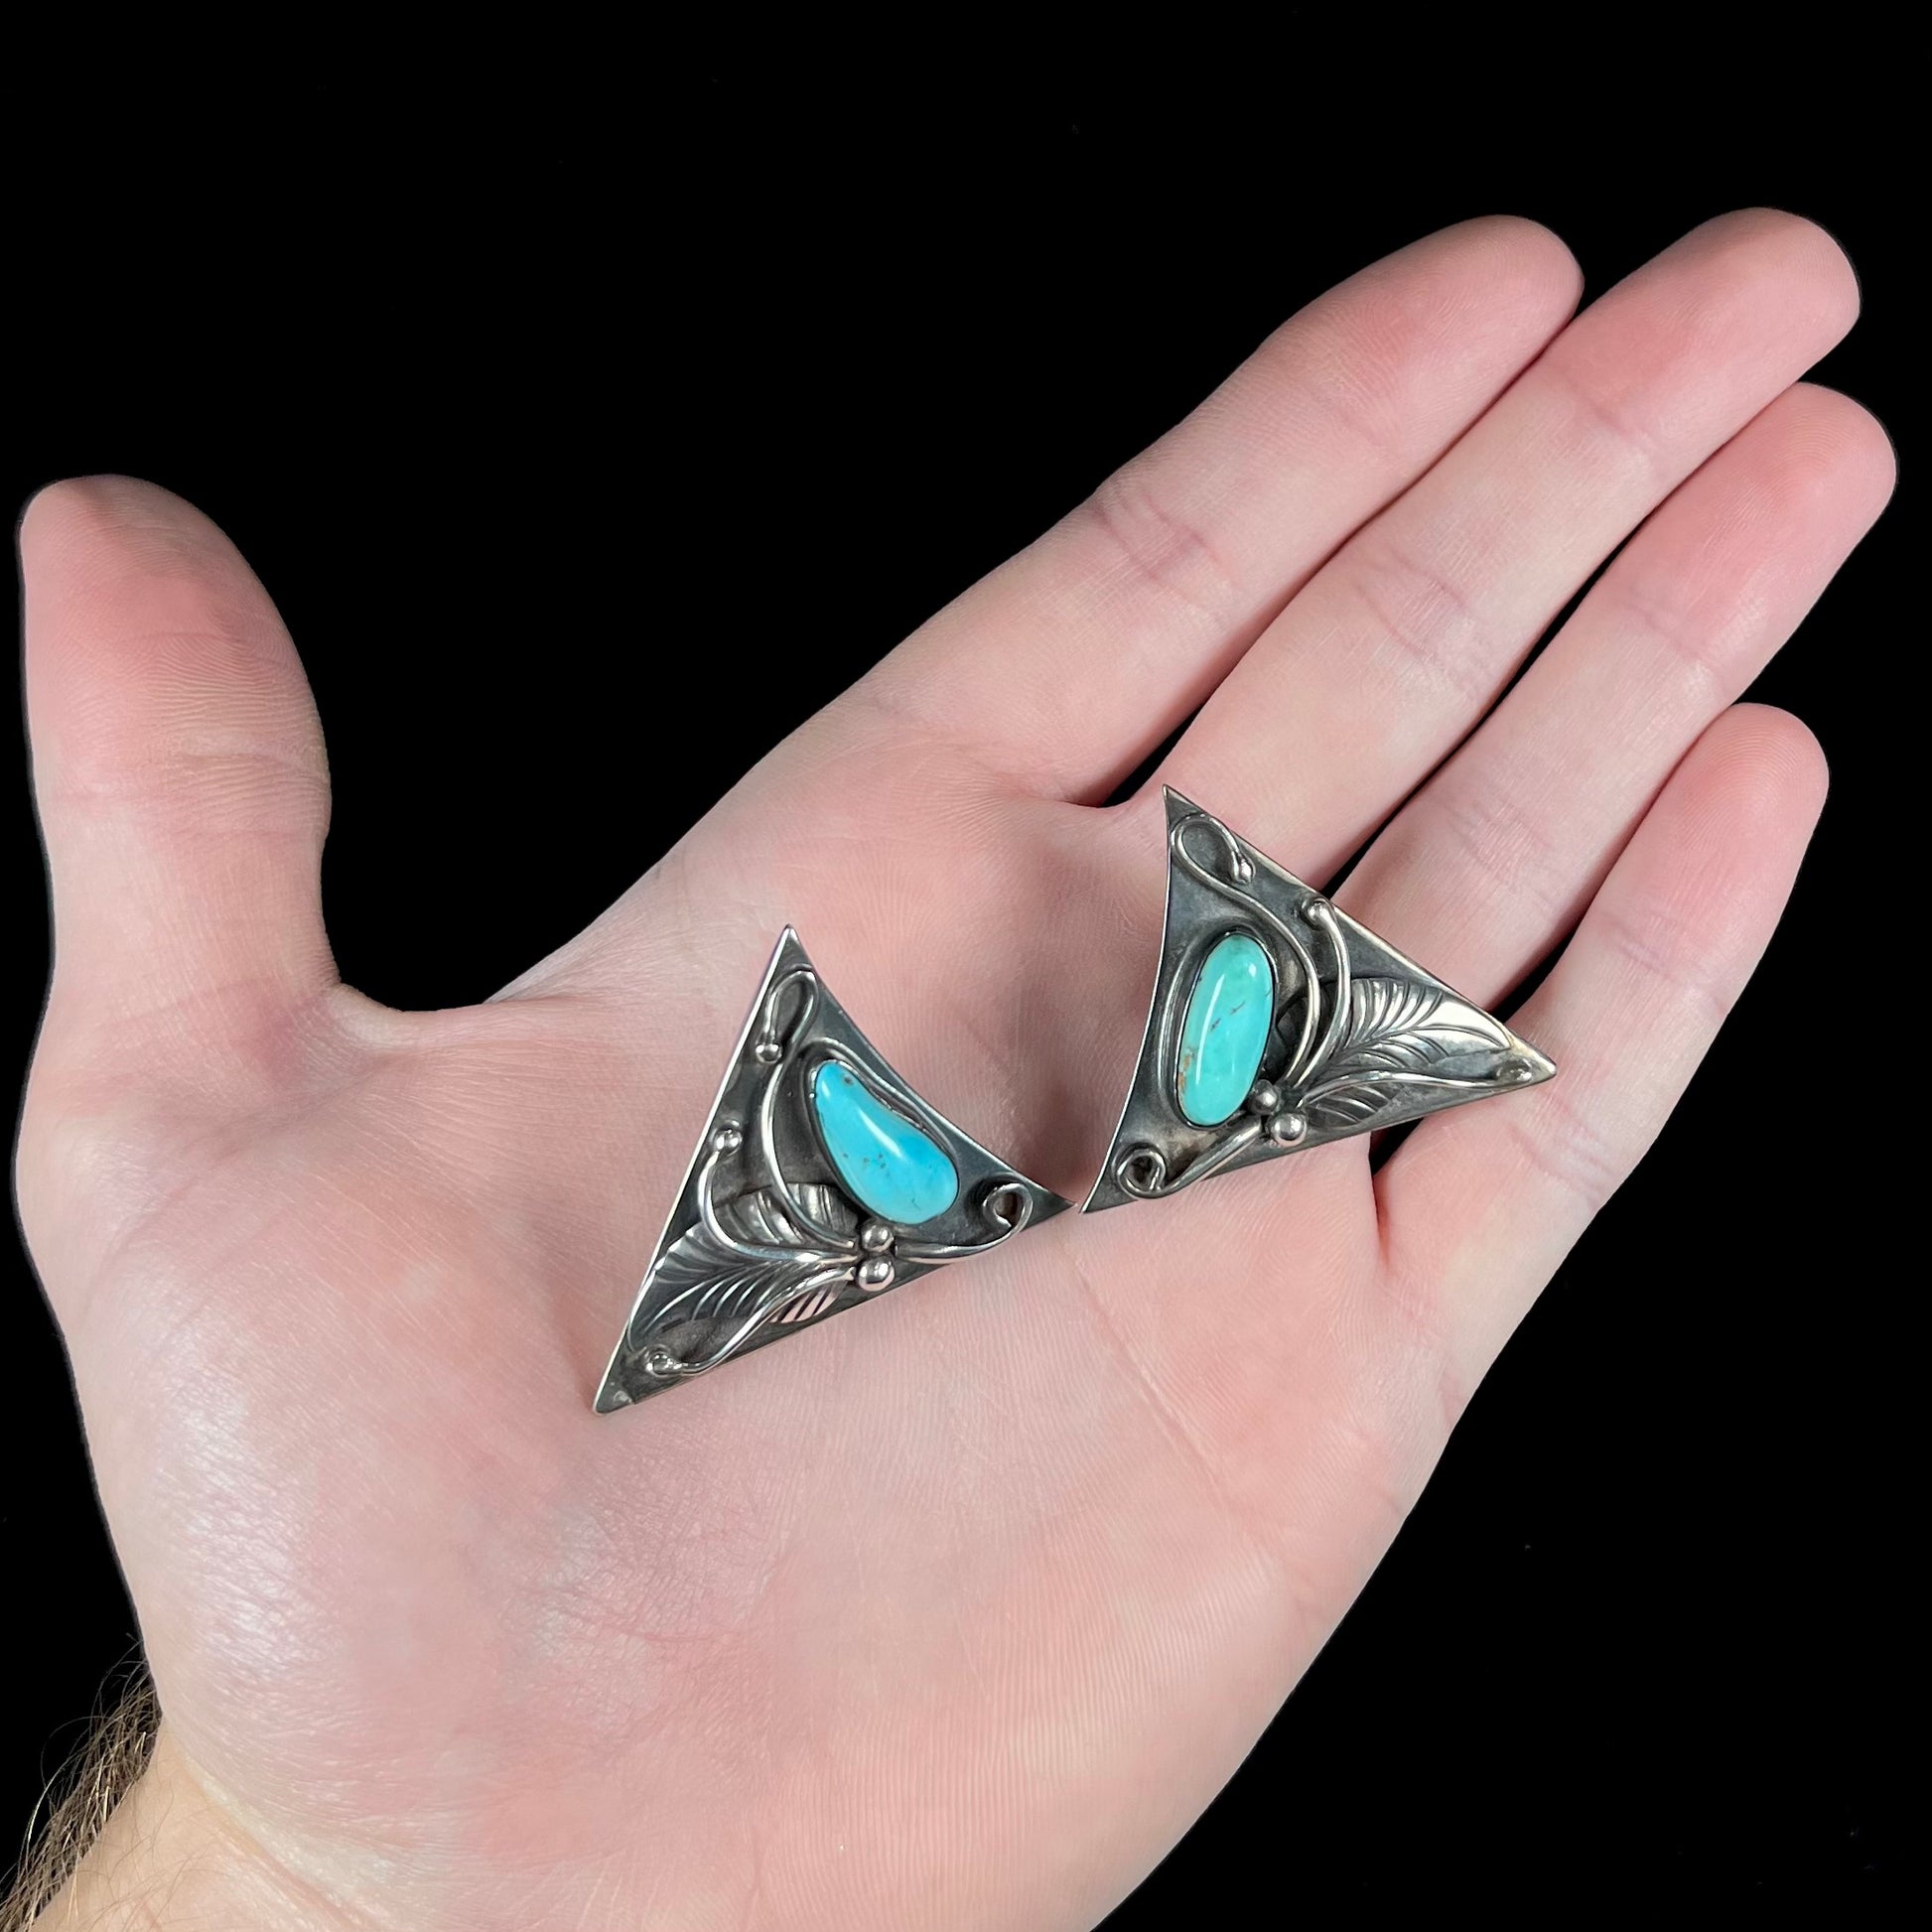 A pair of sterling silver and turquoise shirt collar tips handmade by Navajo artist, Phillip Guerro.